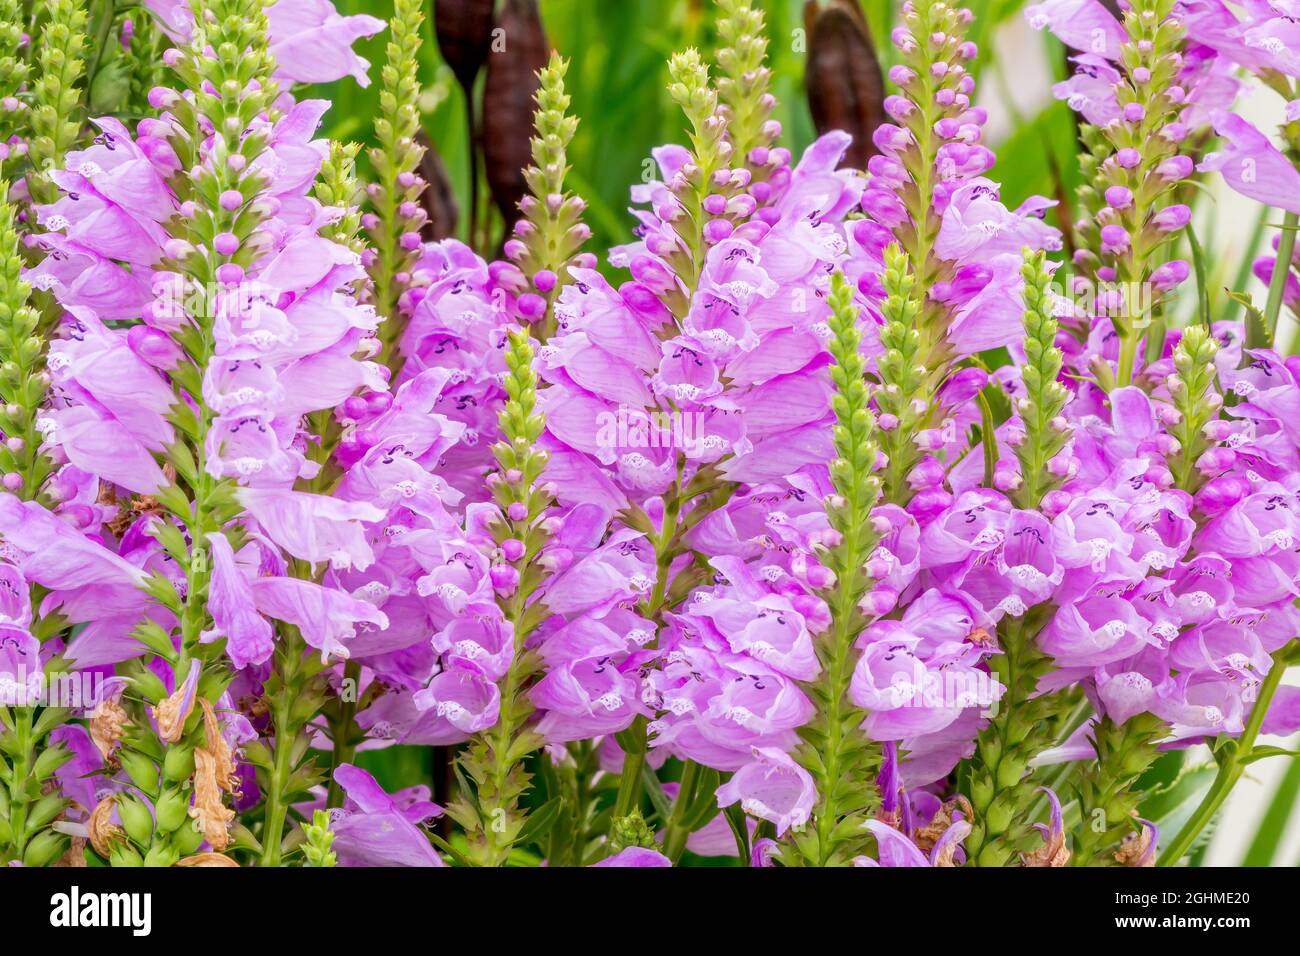 Physostegia Virginiana High Resolution Stock Photography and Images - Alamy